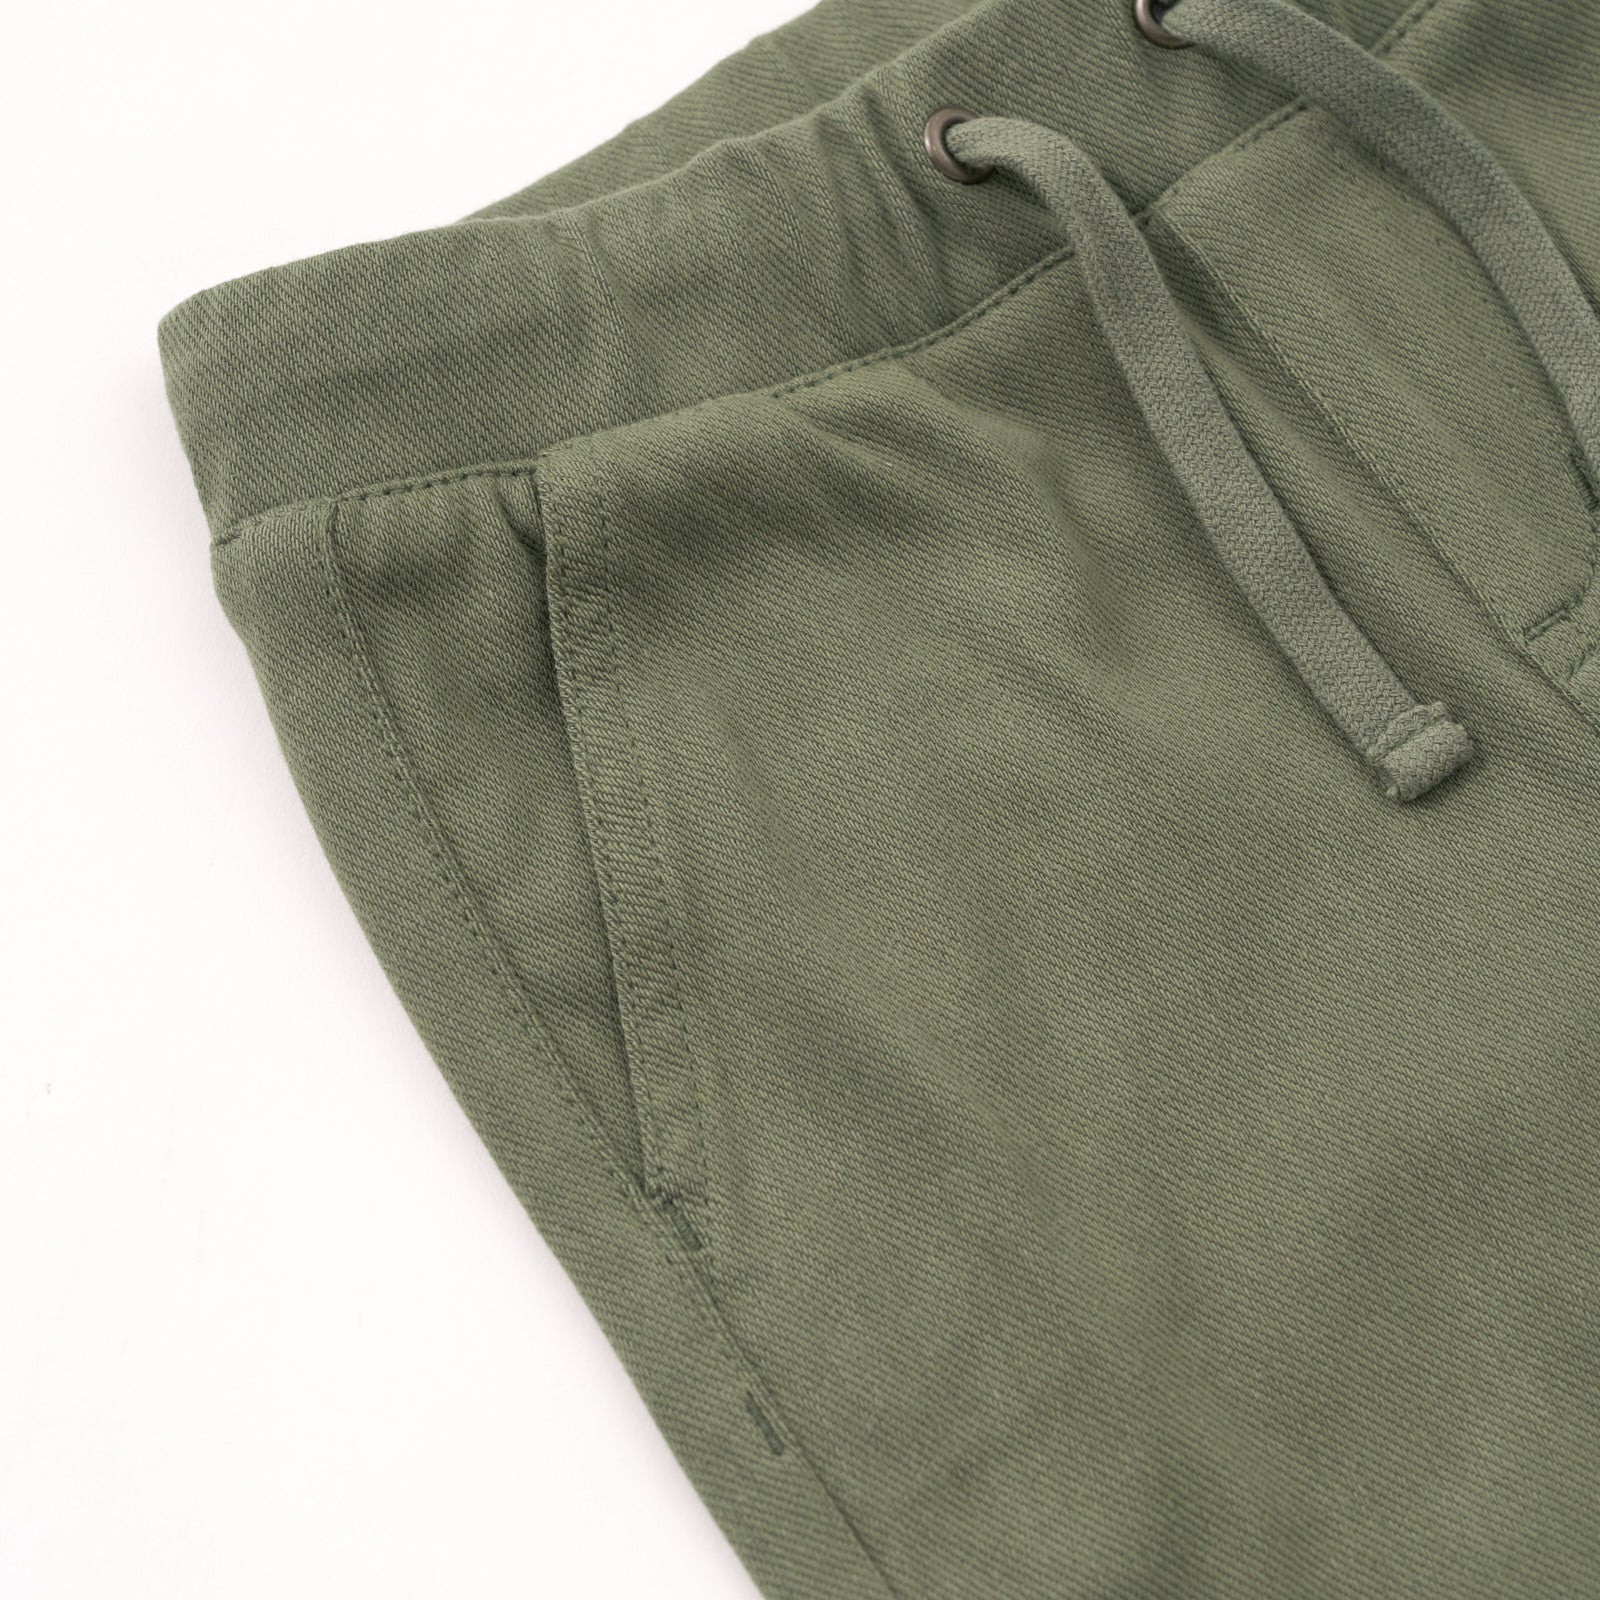 Close up flat lay image of the drawstring and side pocket details on the Olive Denim Jogger